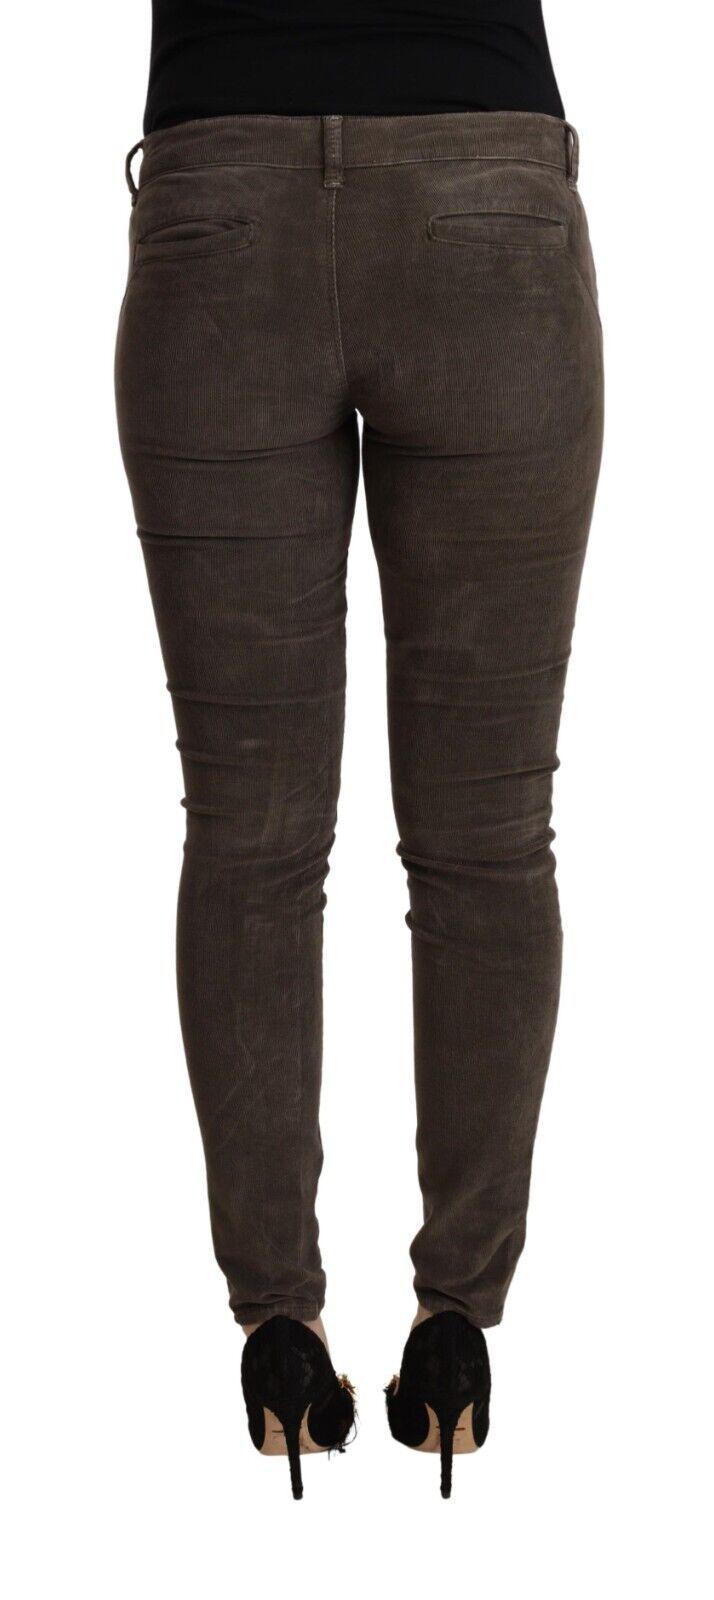 Acht Chic Slim Fit Brown Skinny Jeans - PER.FASHION